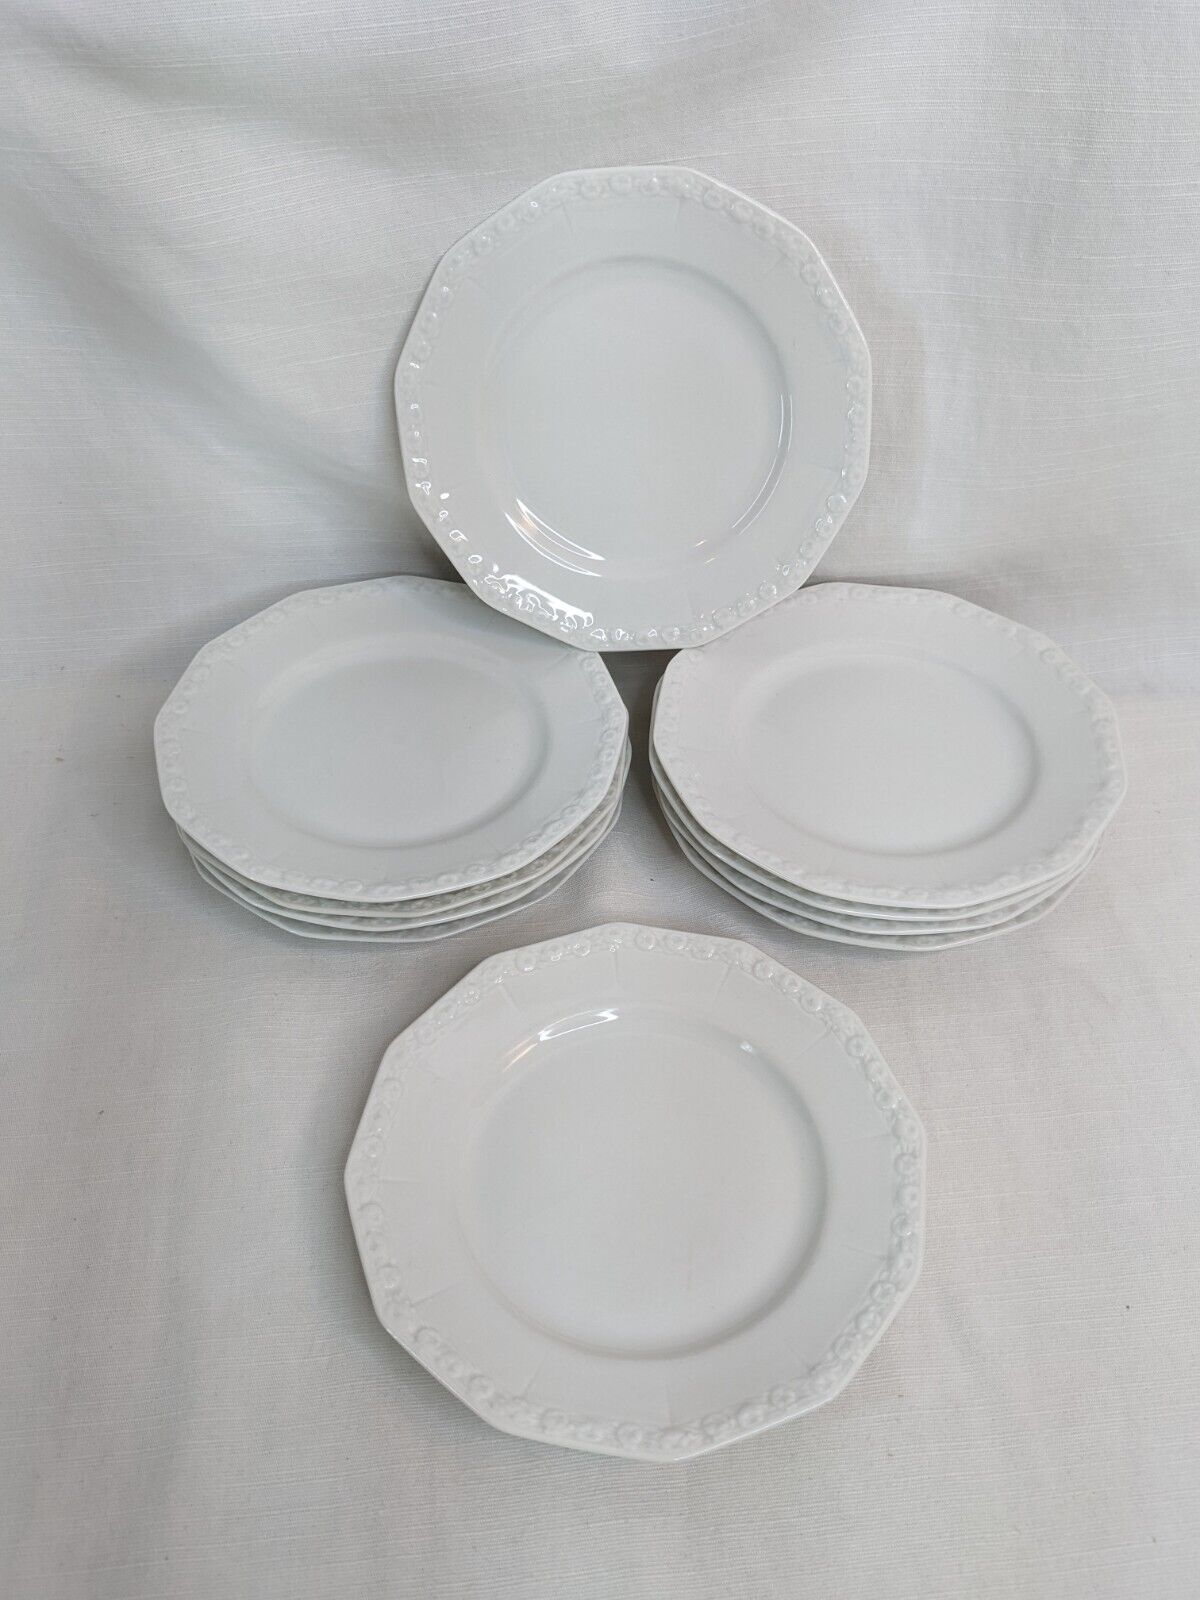 10x Rosenthal Continental: Maria White Classic Rose Bread & Butter Plates, 6.25" Rosenthal